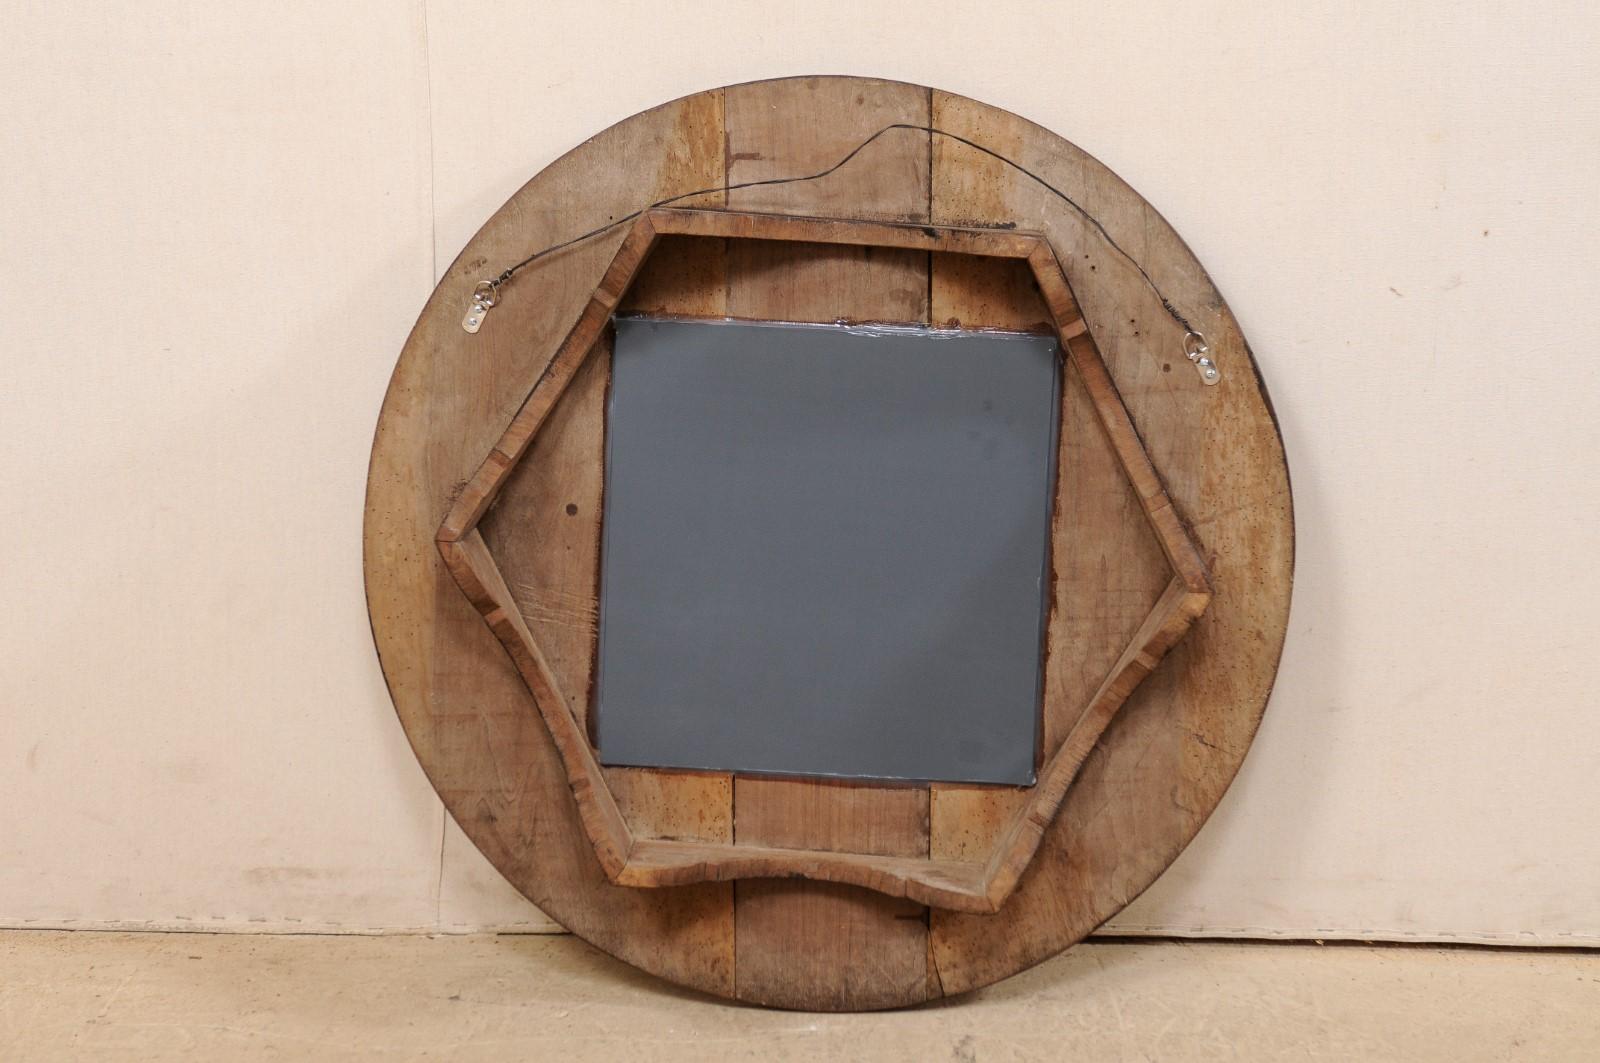 Unique Circular Shaped Mirror with Great Side Profile with Projection from Wall For Sale 2